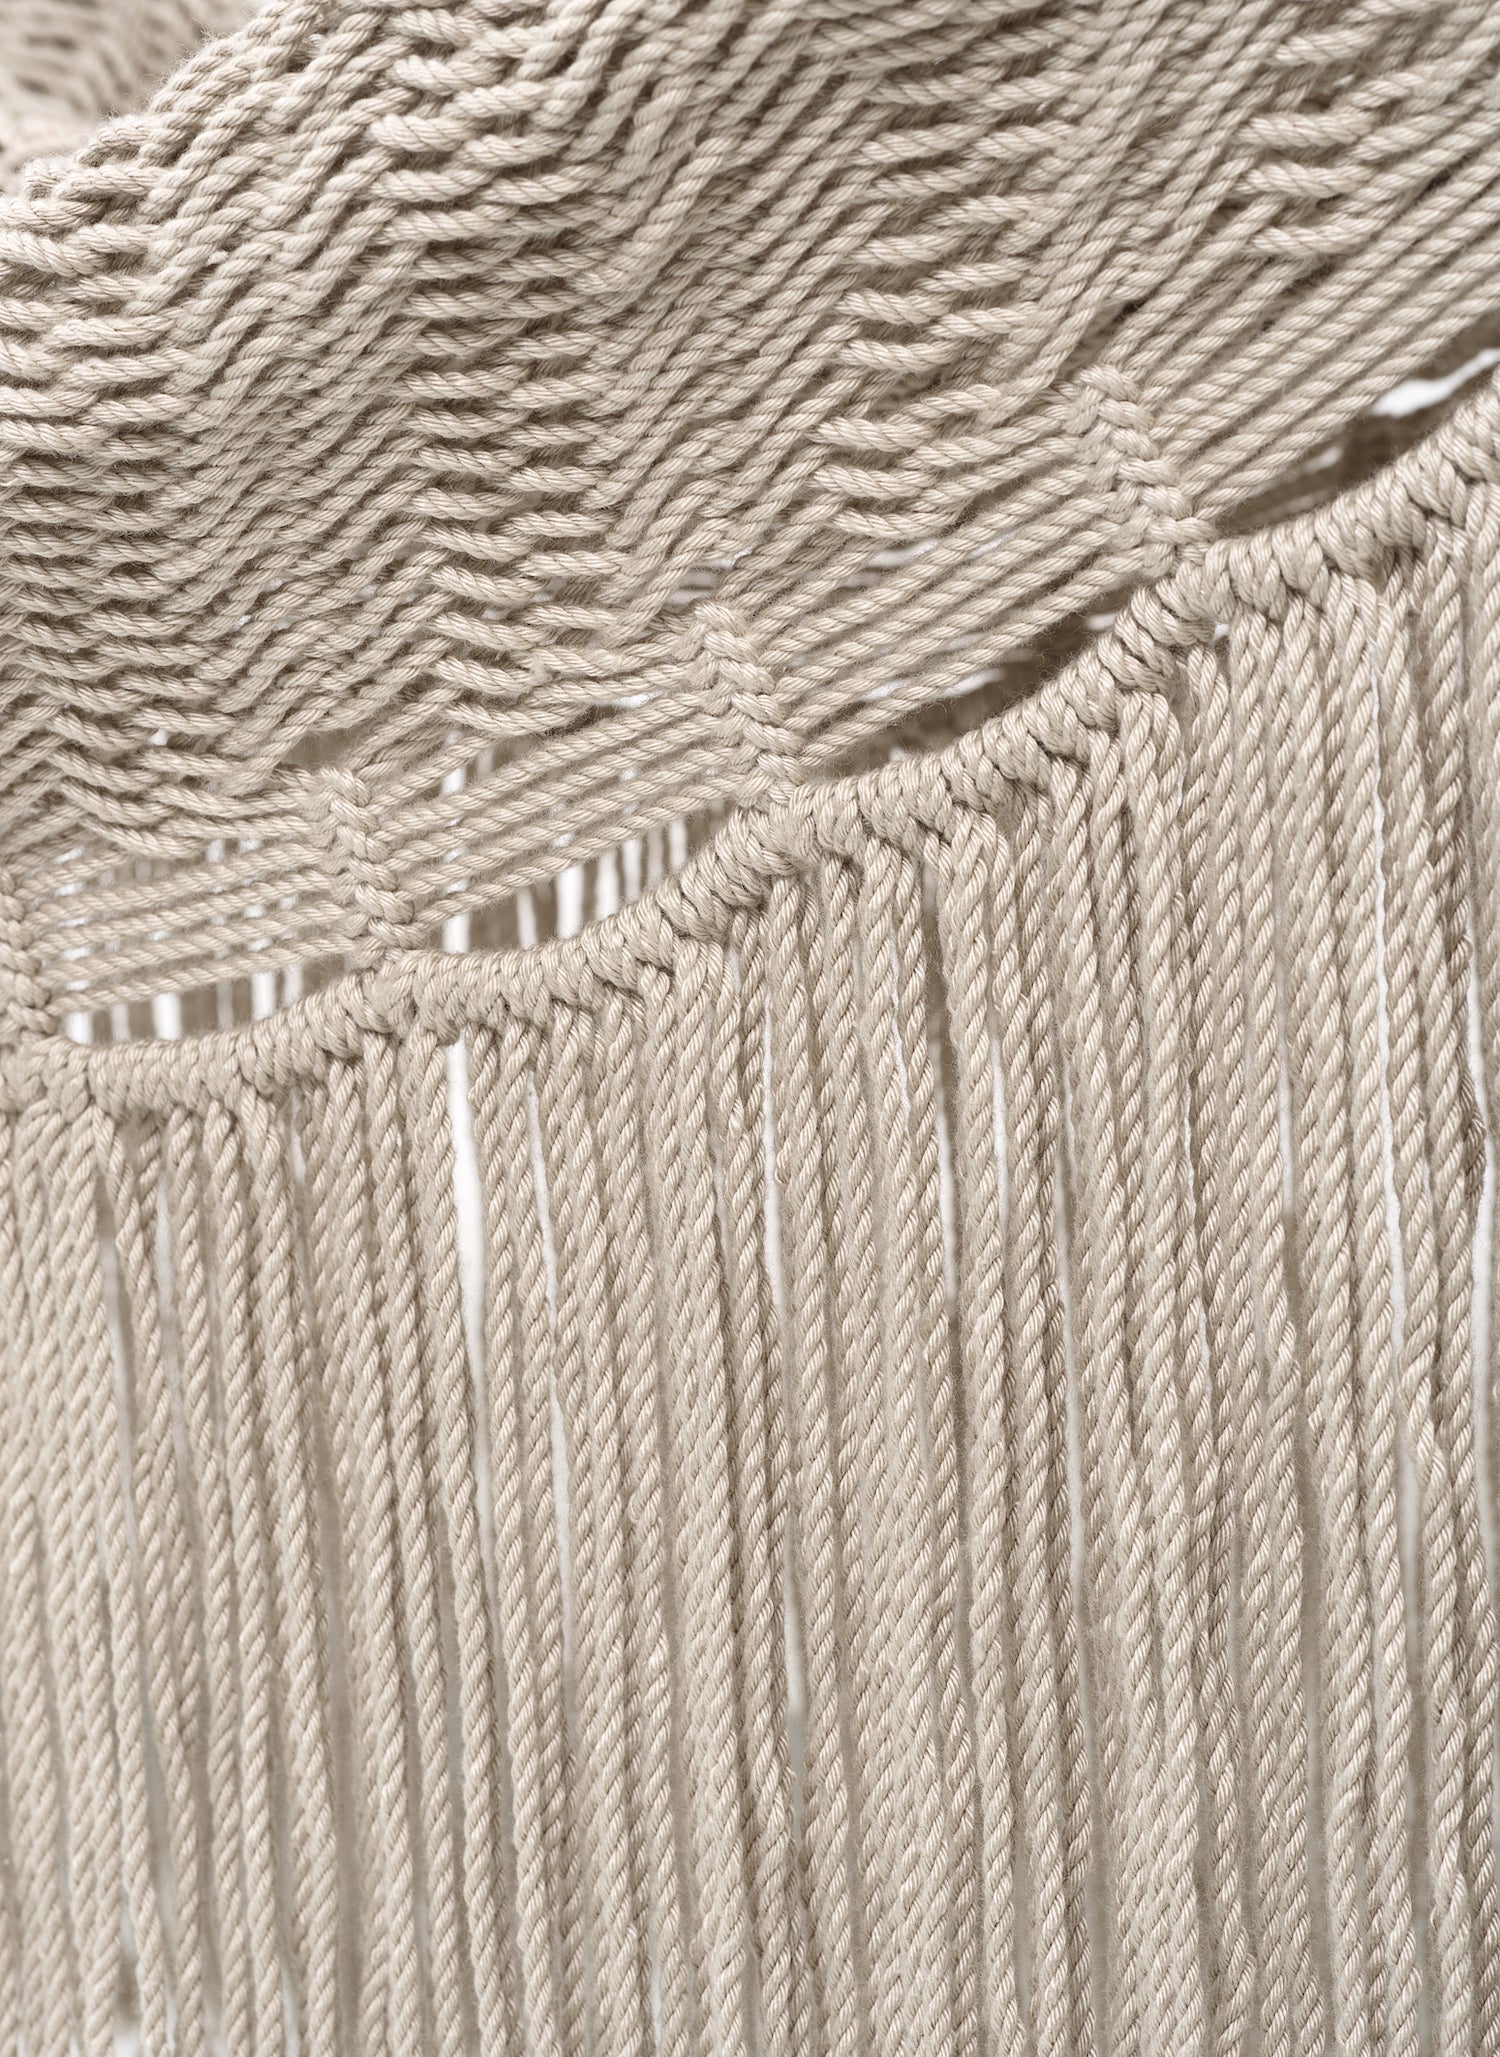 Path Hammock. A minimal bohemian hammock with two rows of fringing in beige.